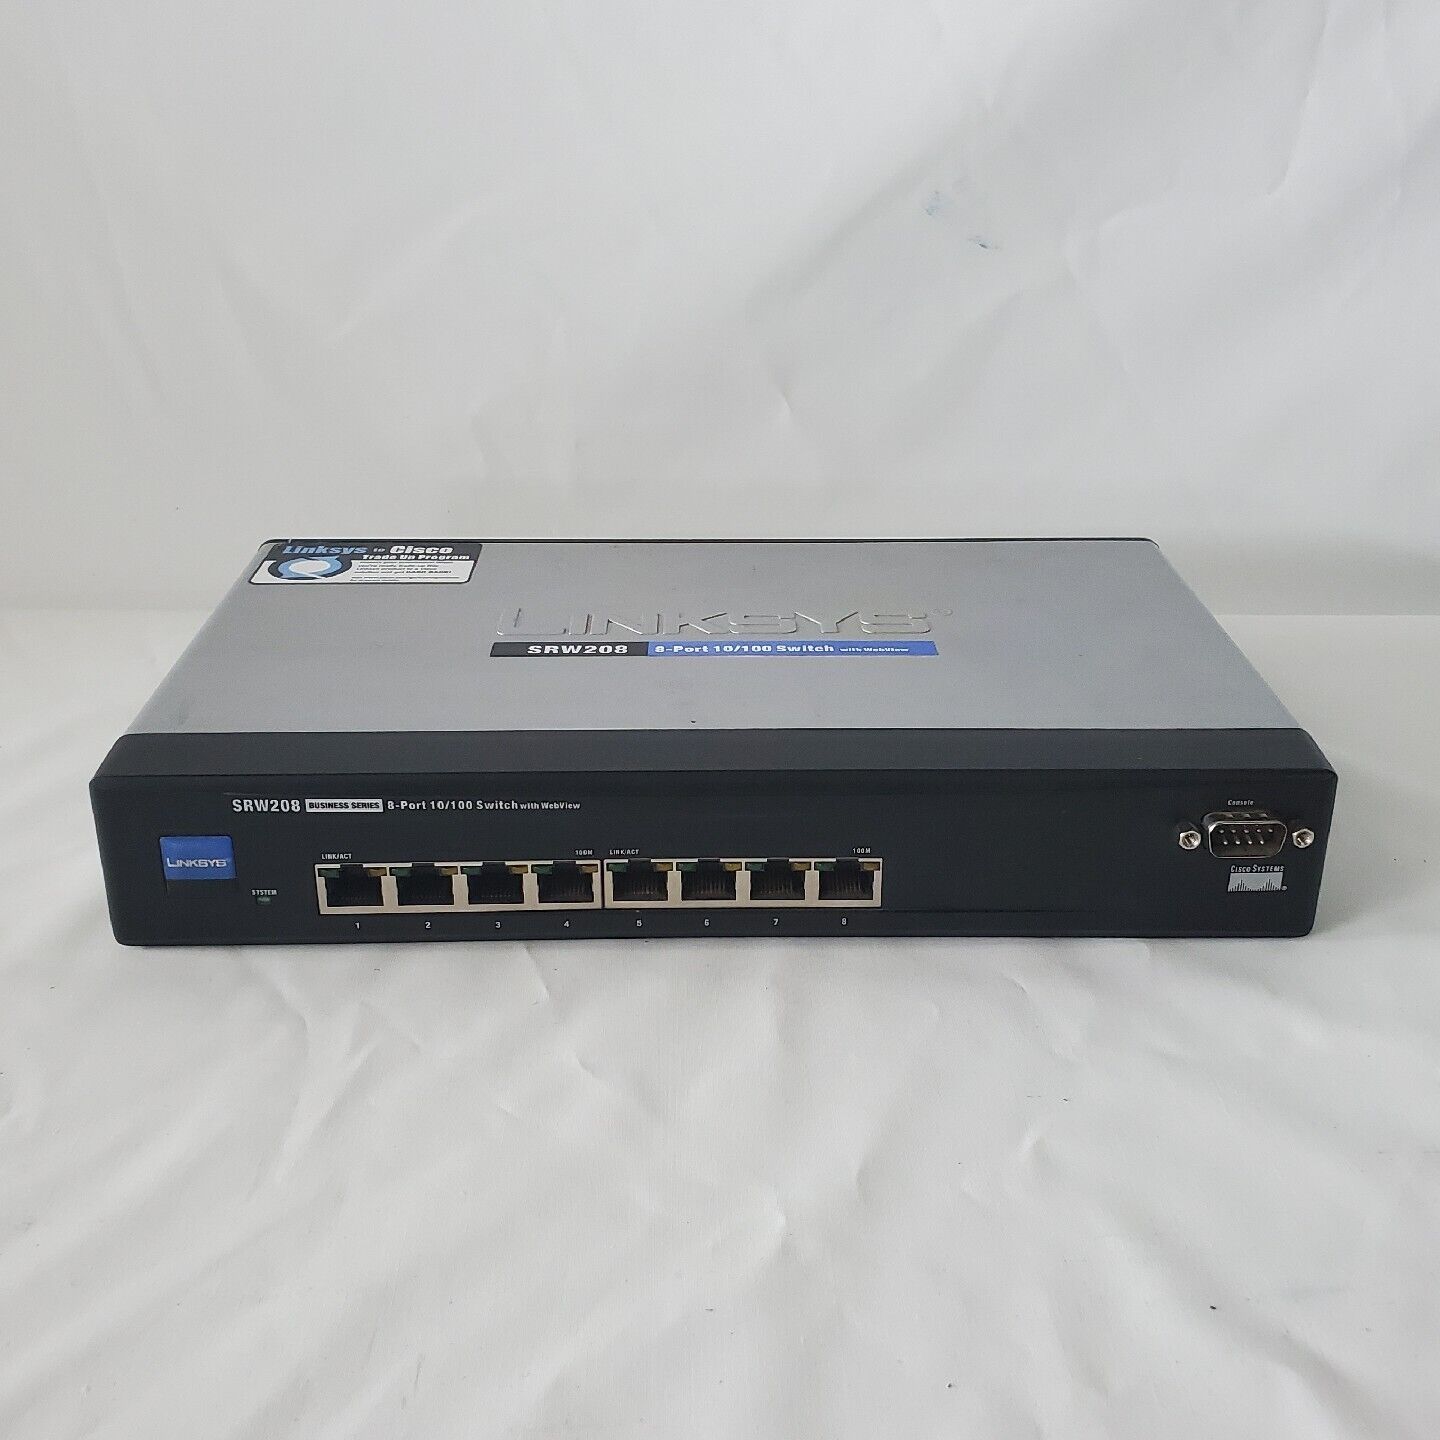 Linksys SRW208 Business Edition 8-Port 10/100 Switch with WebView